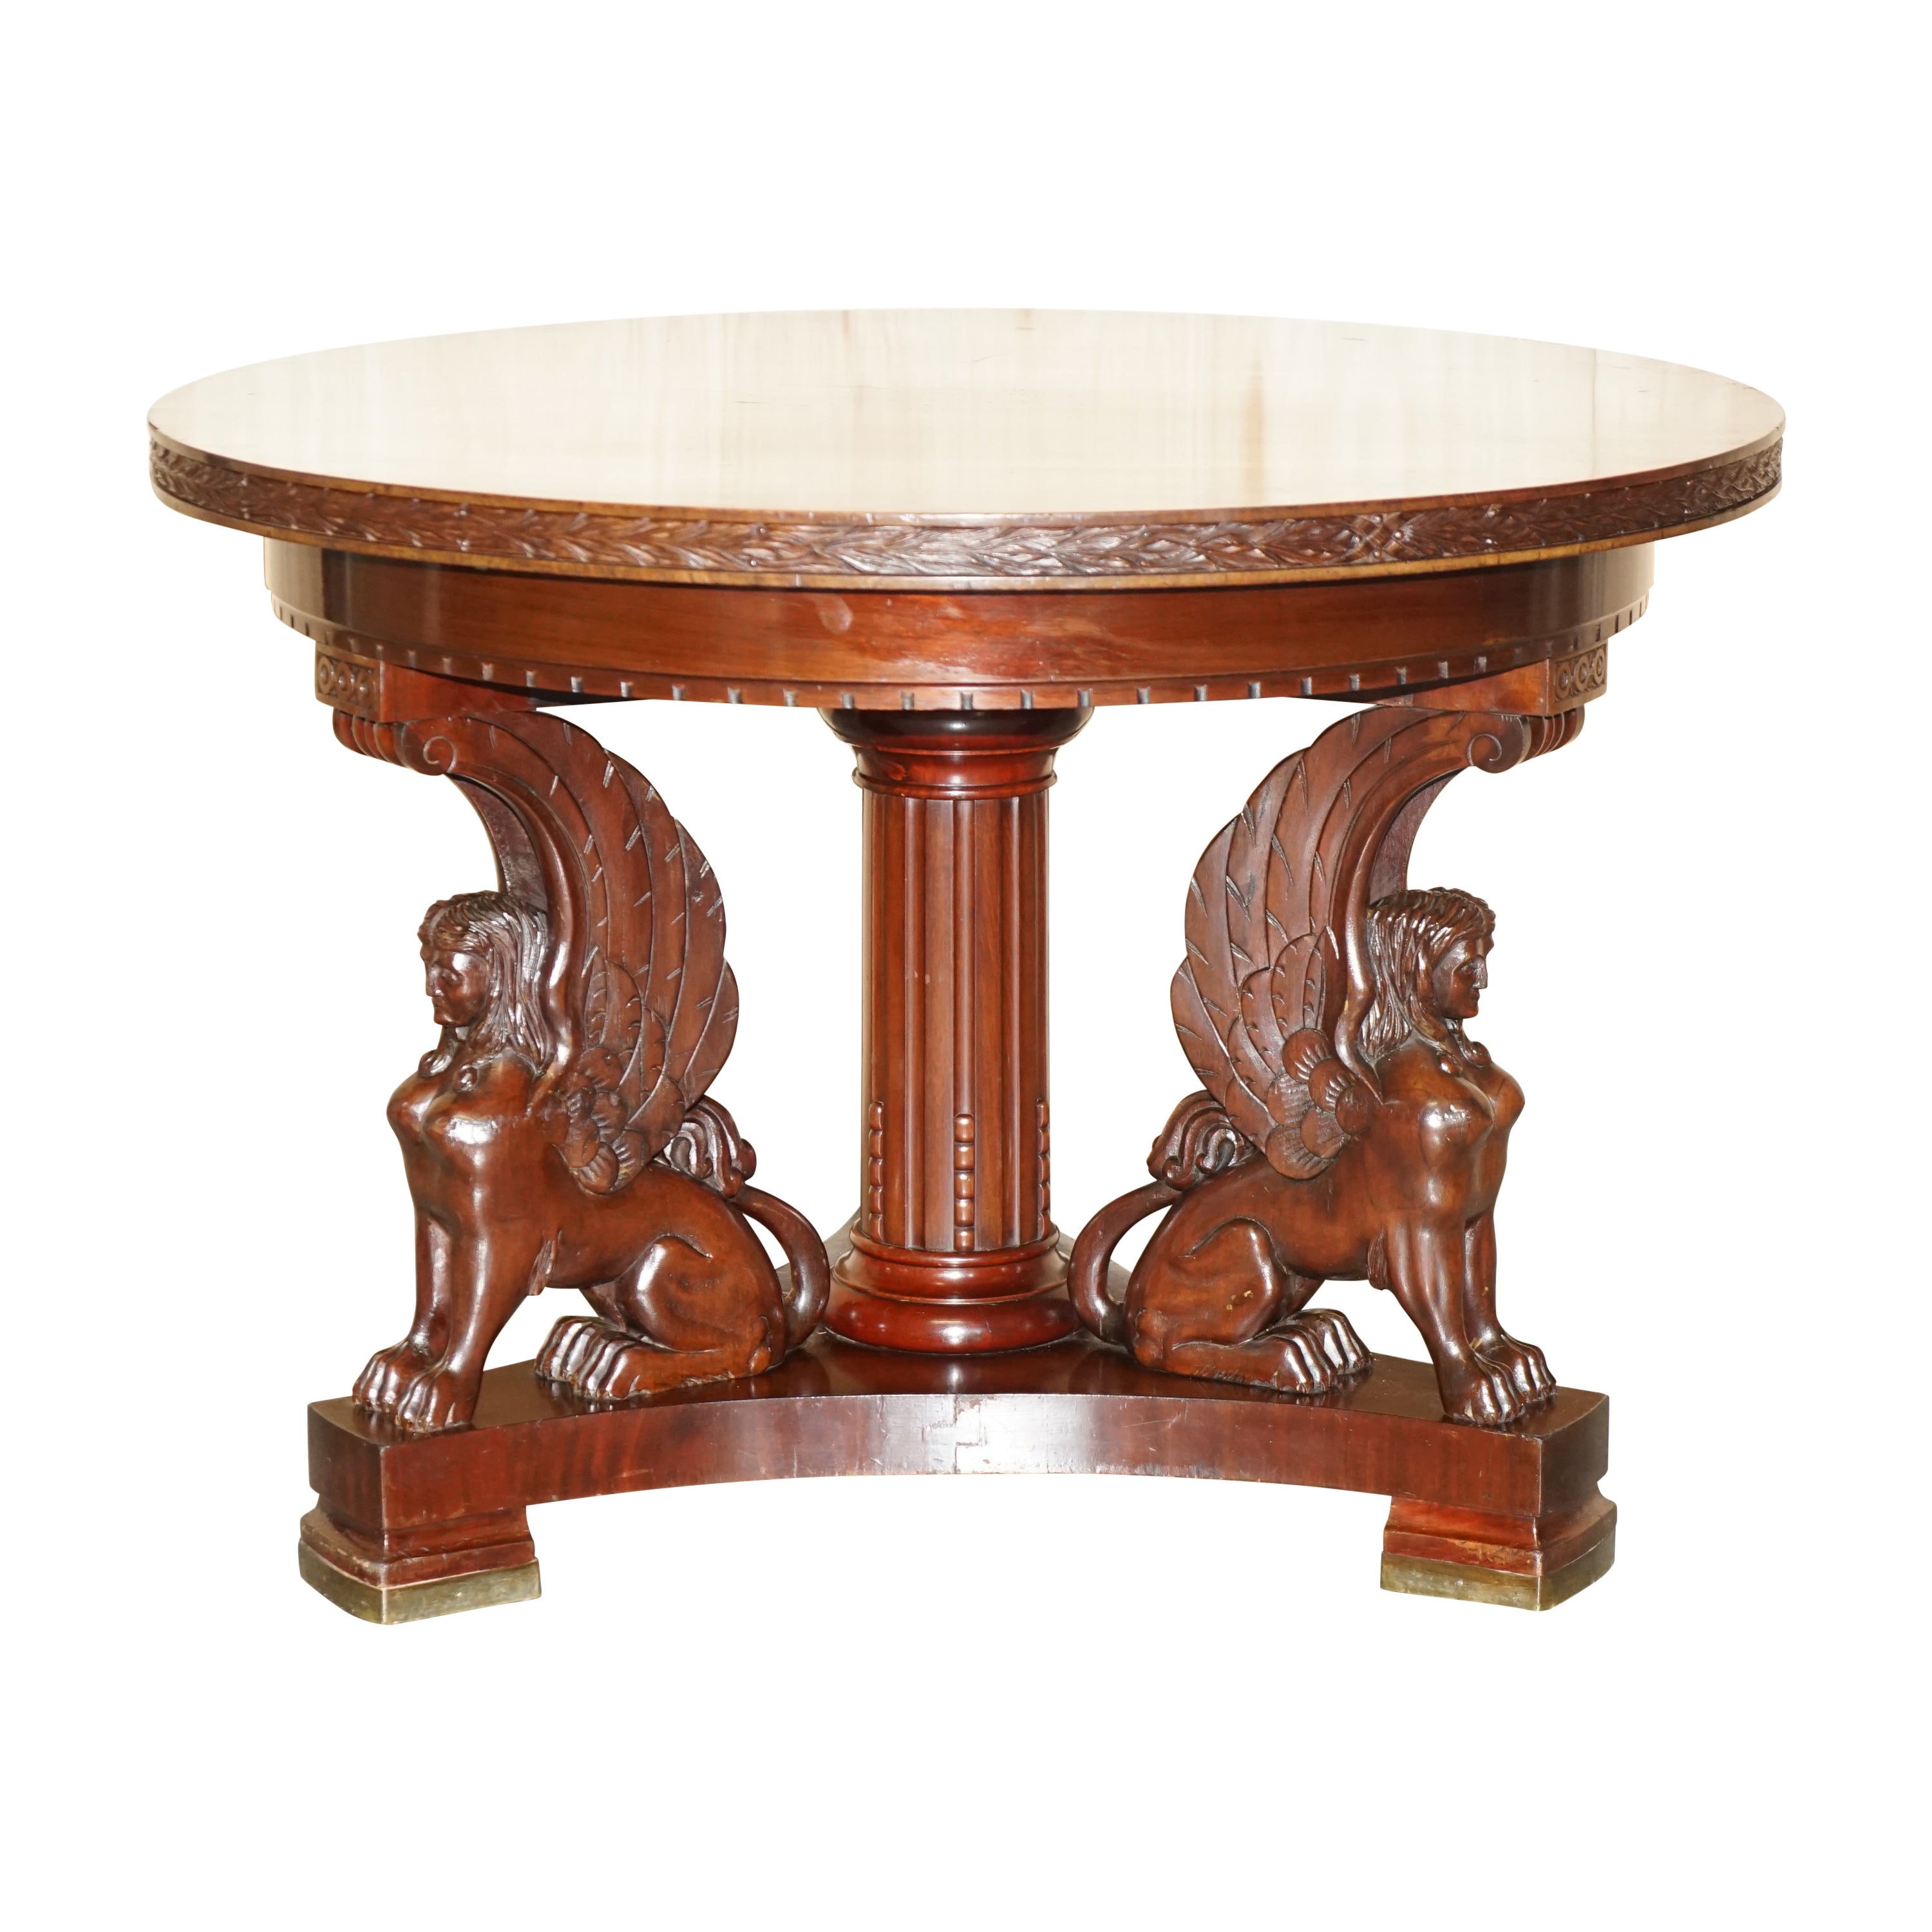 Fine Antique French Neoclassical Hardwood Centre Table with Sphinx Pillared Base For Sale